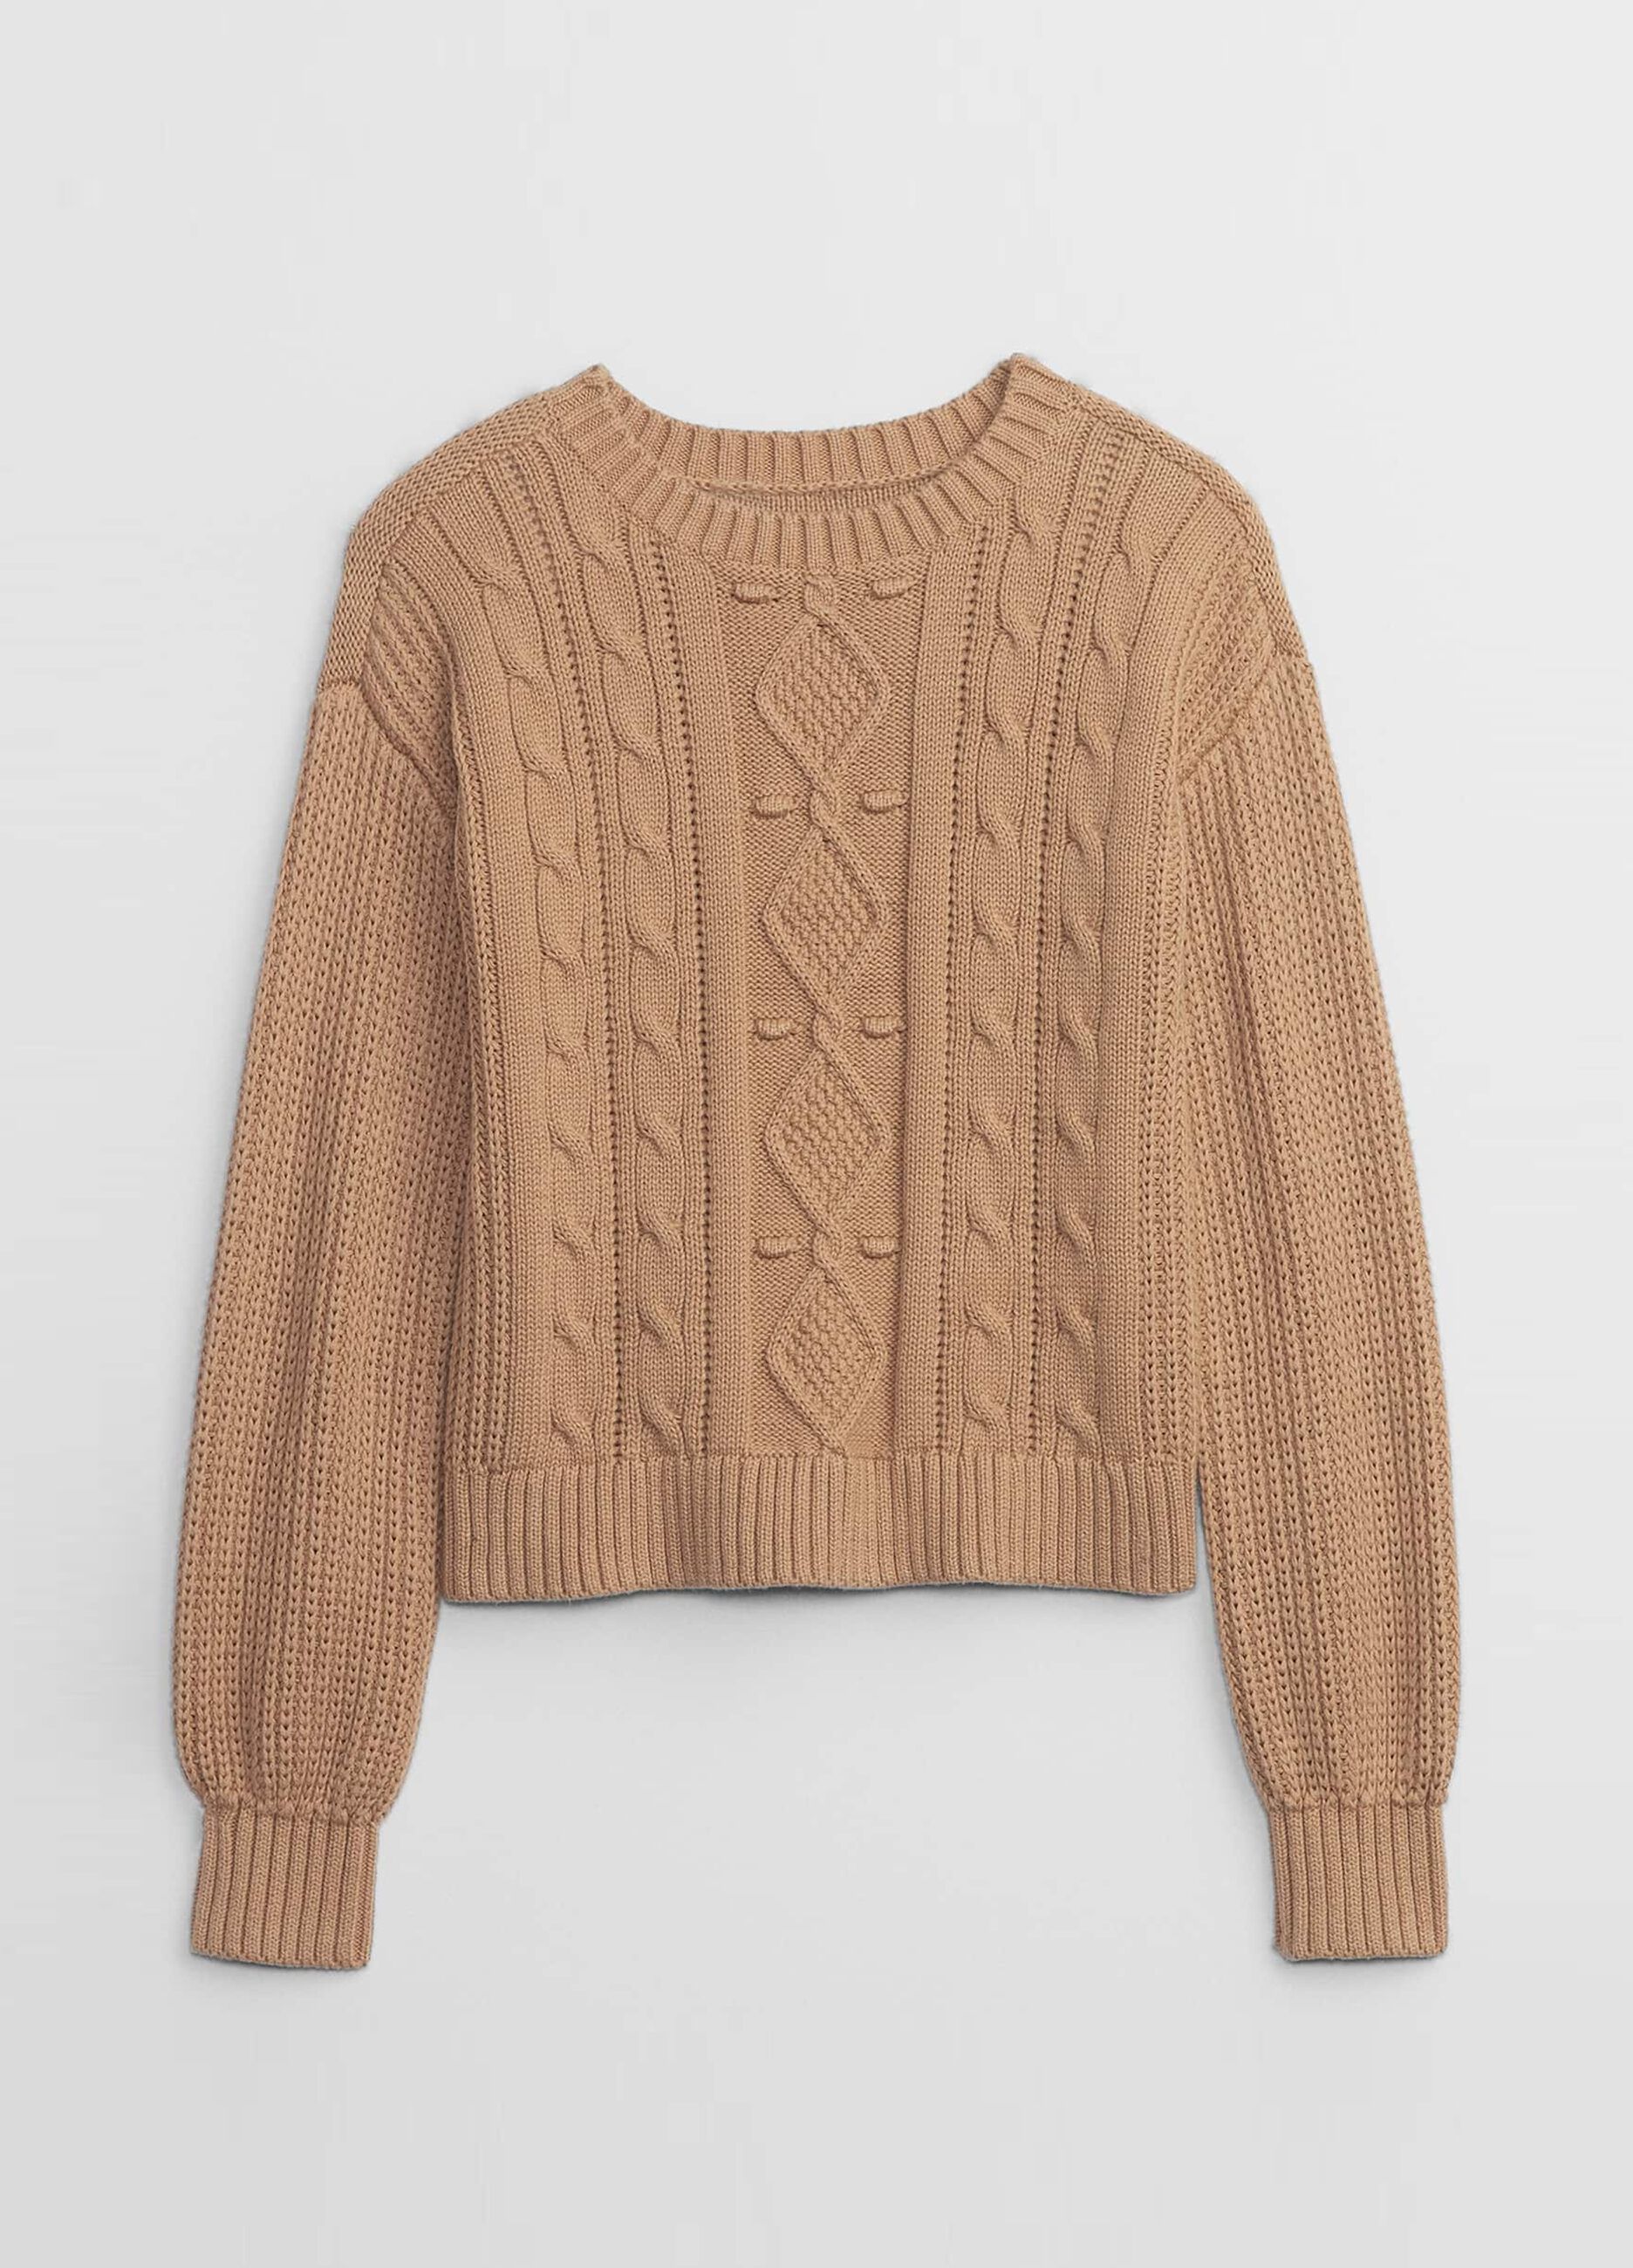 Knitted Arran pullover